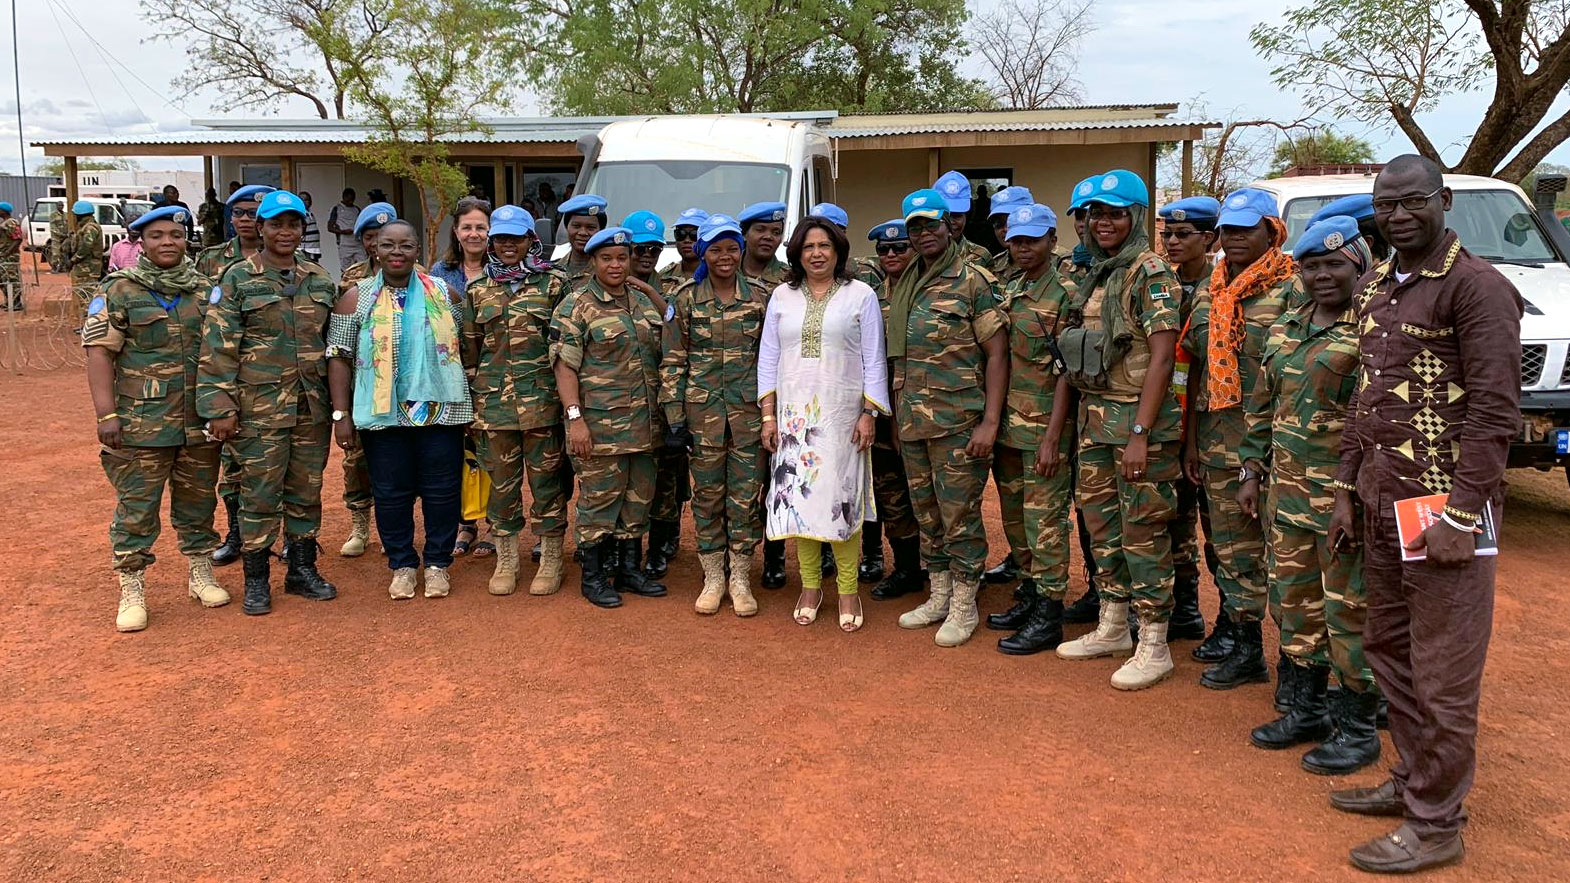 Pramila stands in a row of female peacekeeping officers in uniform.